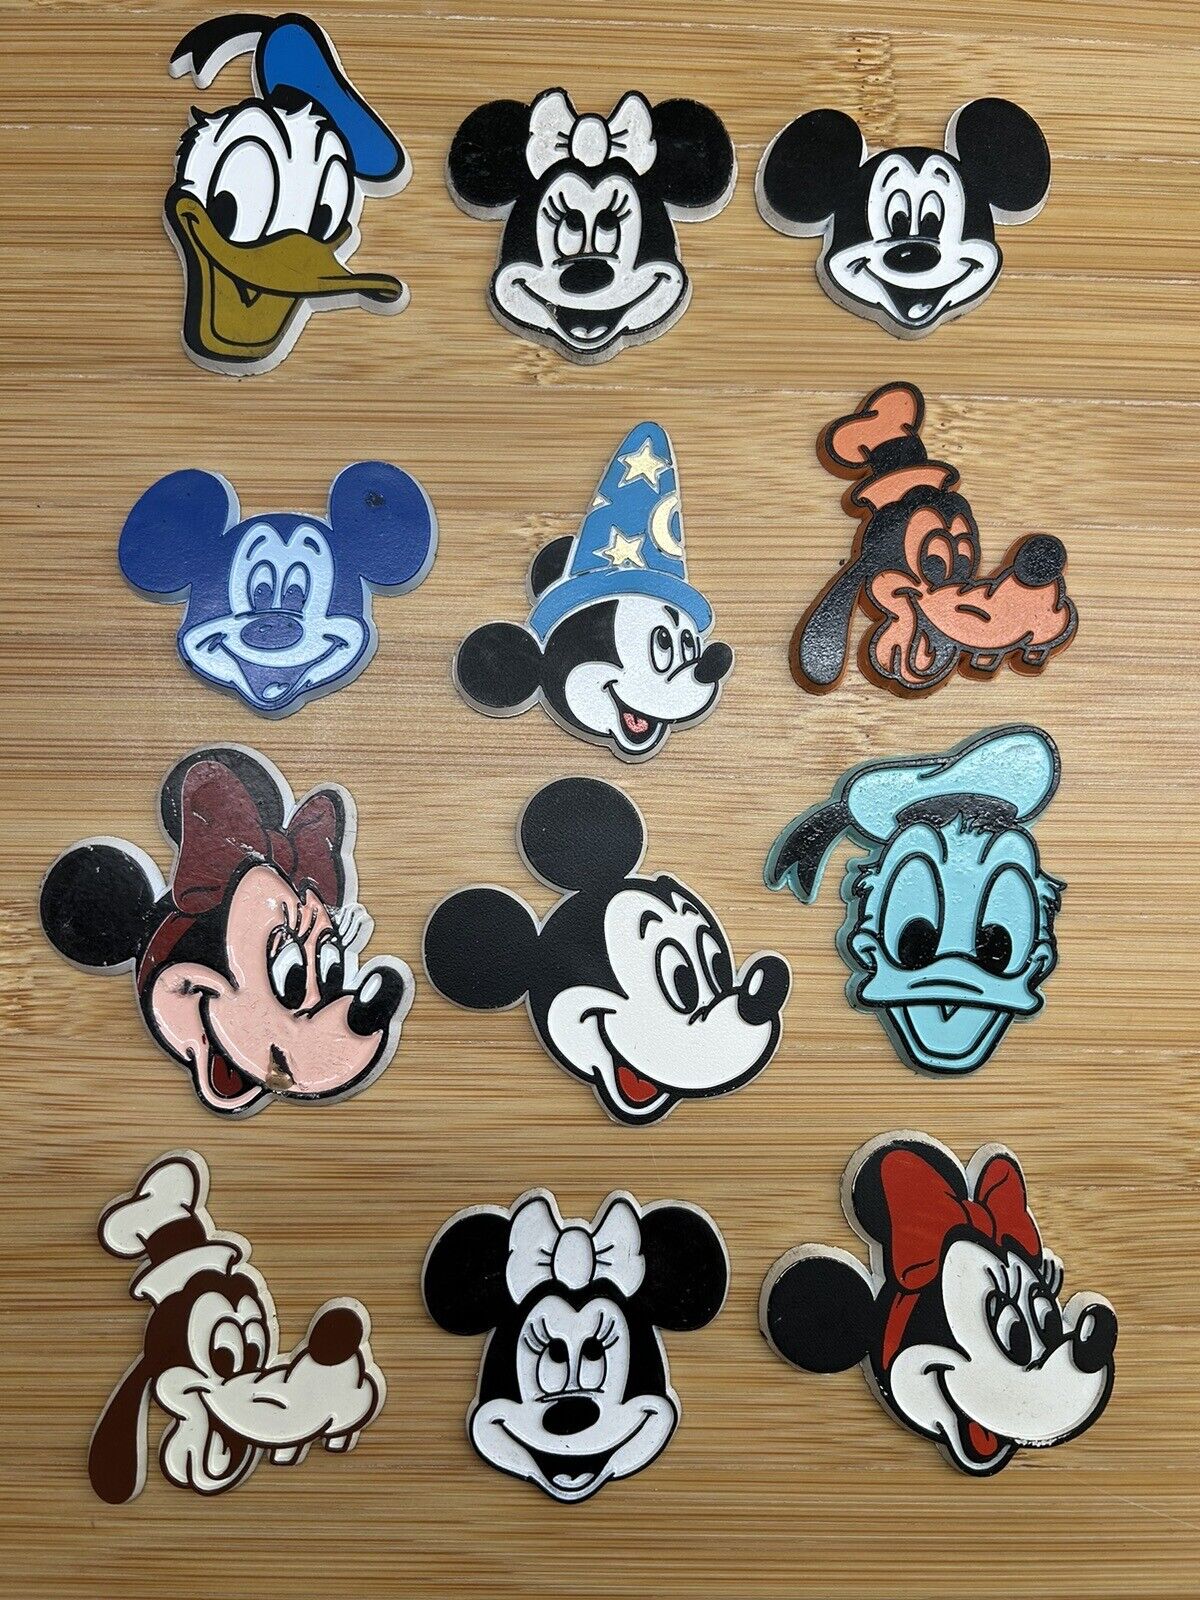 Vintage Lot Of 12 80s 90s Disney Mickey Mouse Donald Goofy Old Fridge Magnets